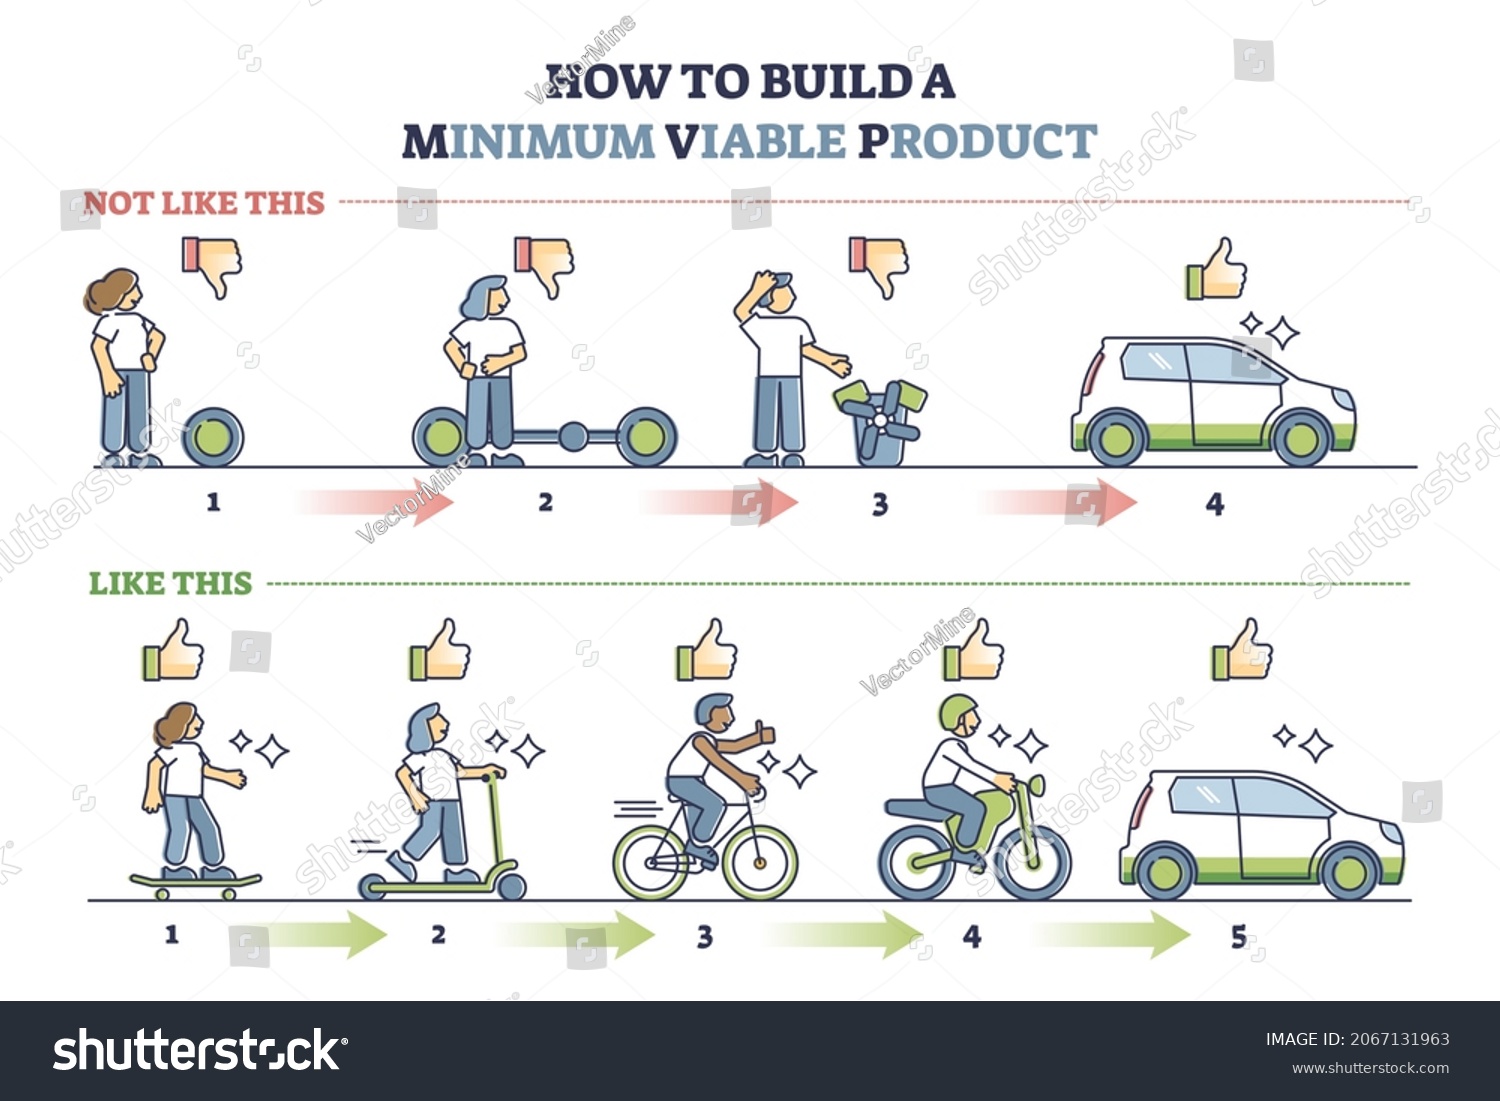 Minimum viable product or MVP development steps explanation outline diagram. Labeled educational technique for how to introduced new good to market and get attention from consumers vector illustration #2067131963